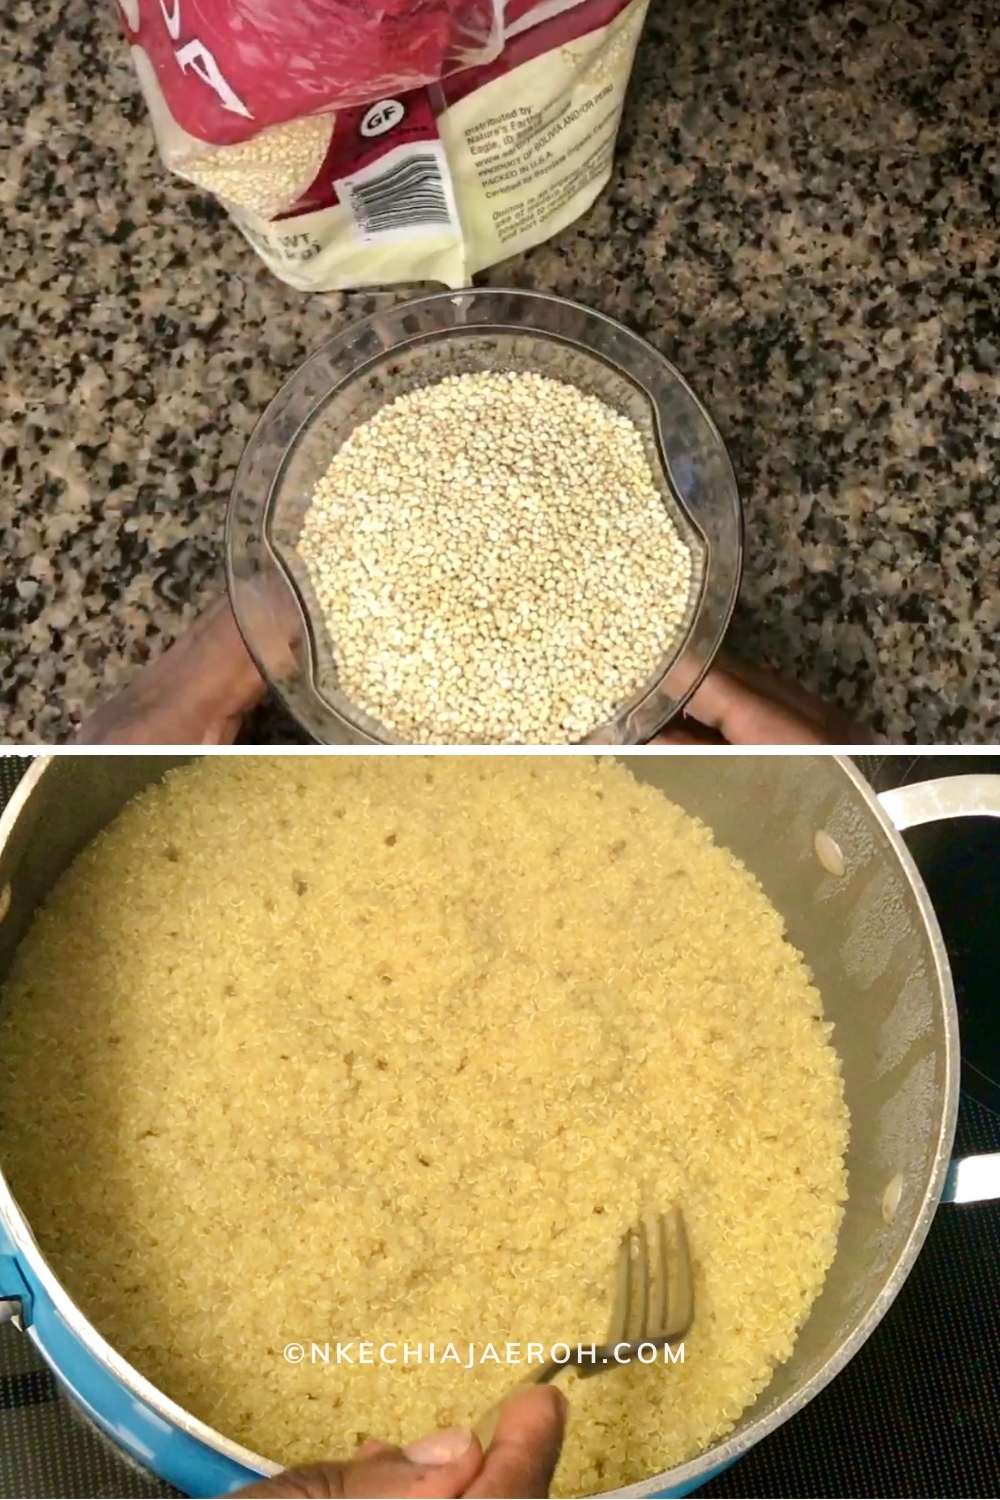 How to cook quinoa: Add 1½ cups of chicken broth to the pan and set the stove on medium. Bring to a boil, then add washed quinoa and 2-3 bare leaves, cover, and cook for 15 minutes. Turn off the stove and allow the quinoa pan to sit/rest covered for another 5 minutes. Use for any recipe such as this one.